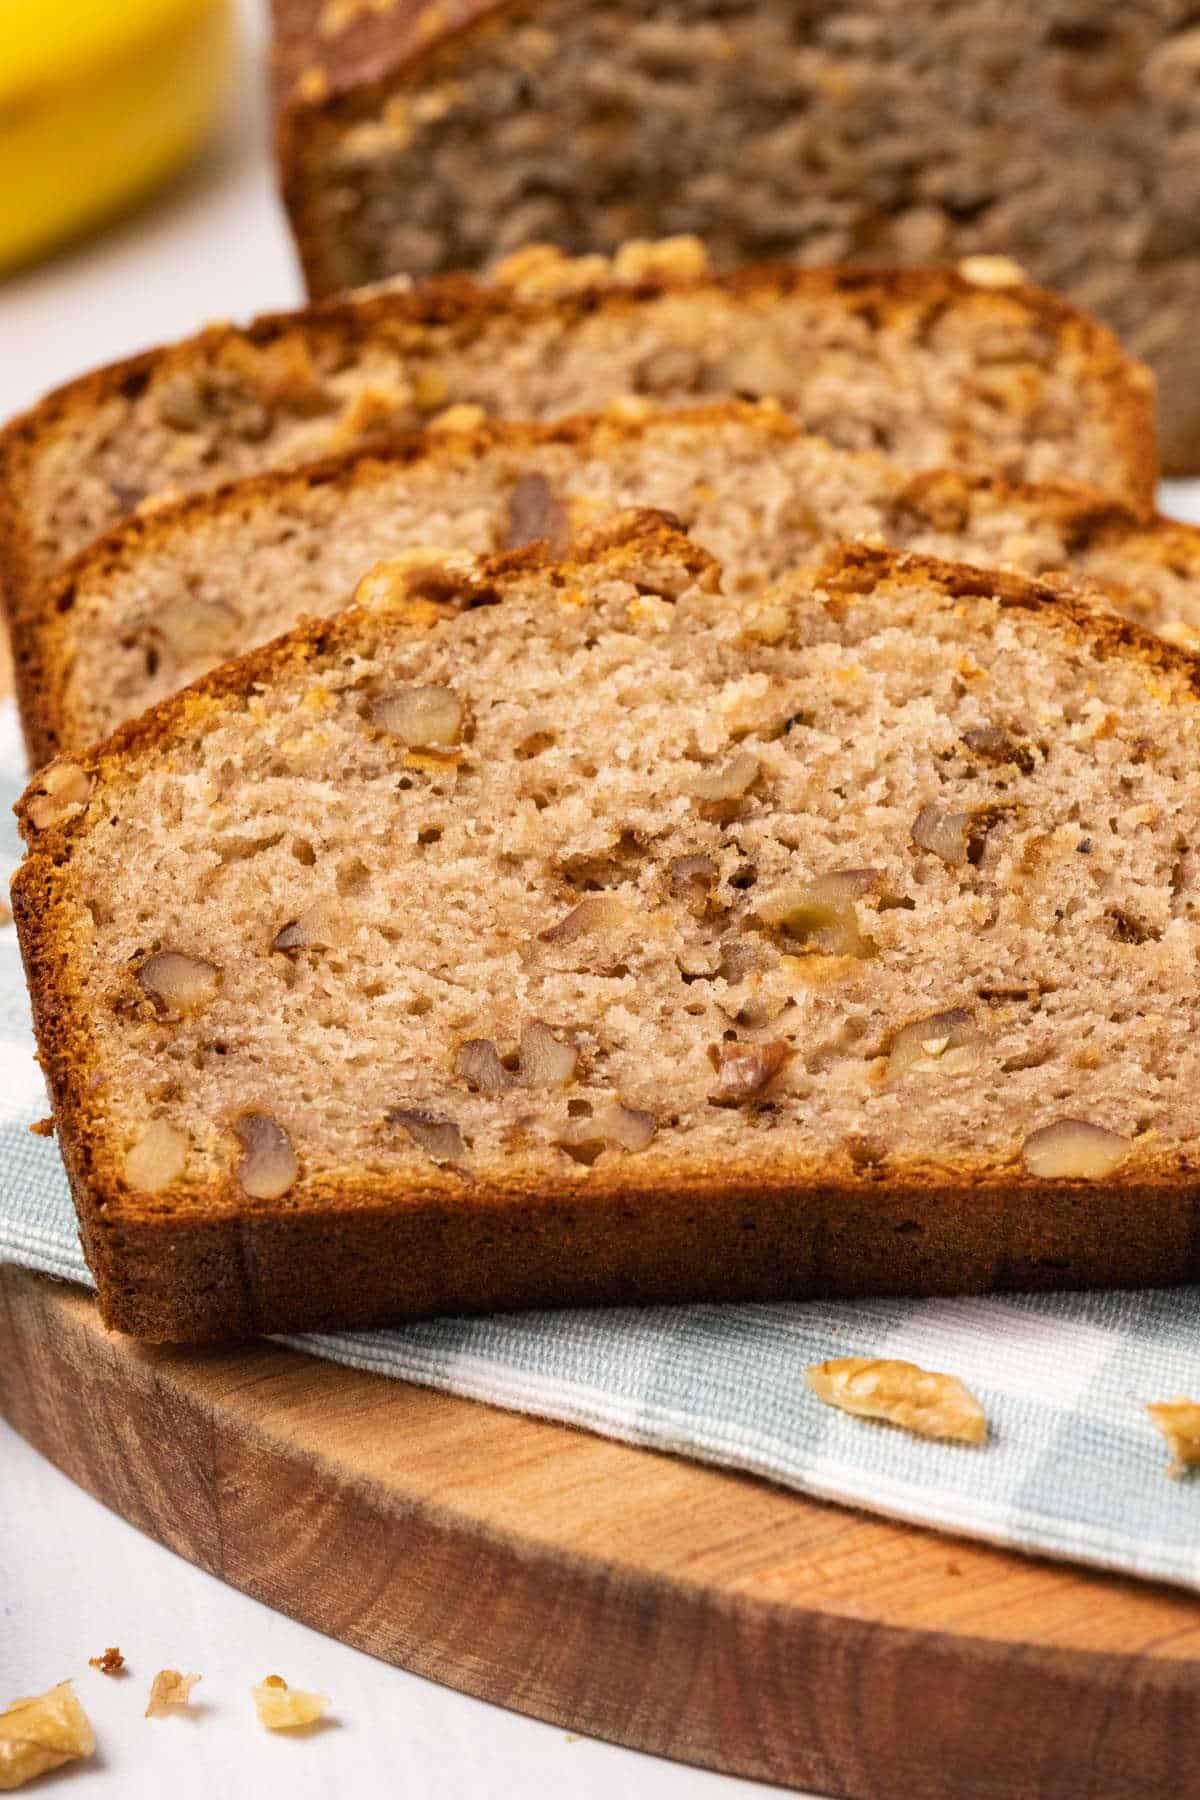 Slices of banana bread on a wooden board. 